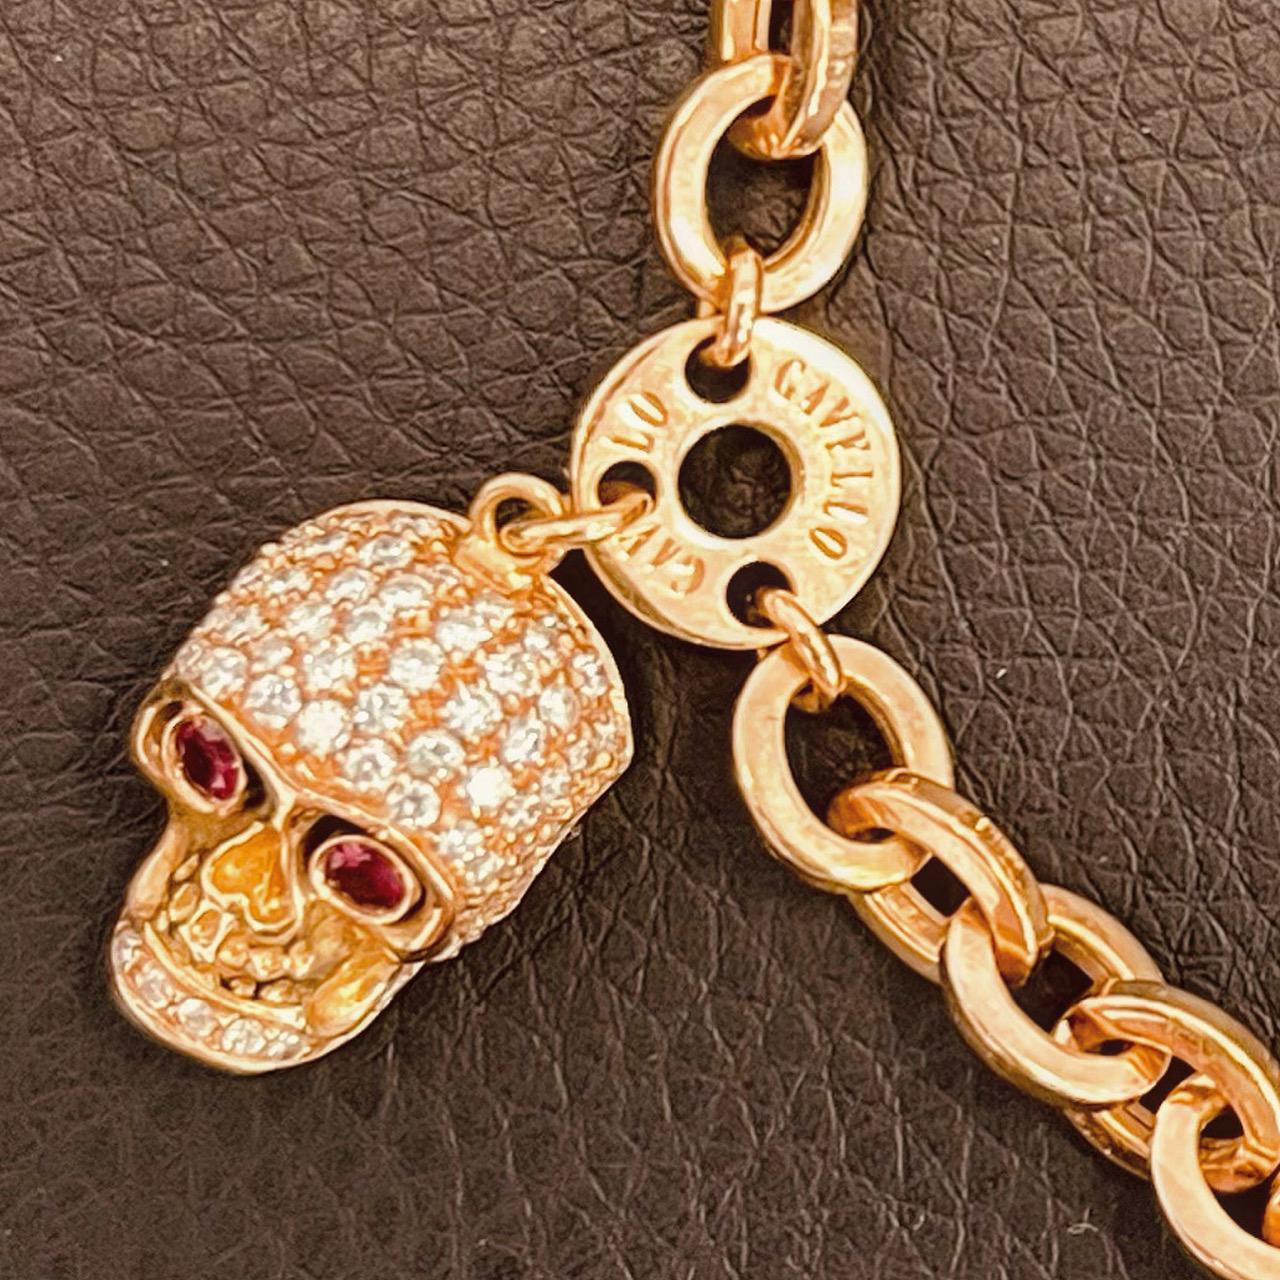 Gavello 18 Carat Gold, 2.2 Carat Diamonds and 0.5 Carat Ruby Eye Skull Necklace For Sale 9